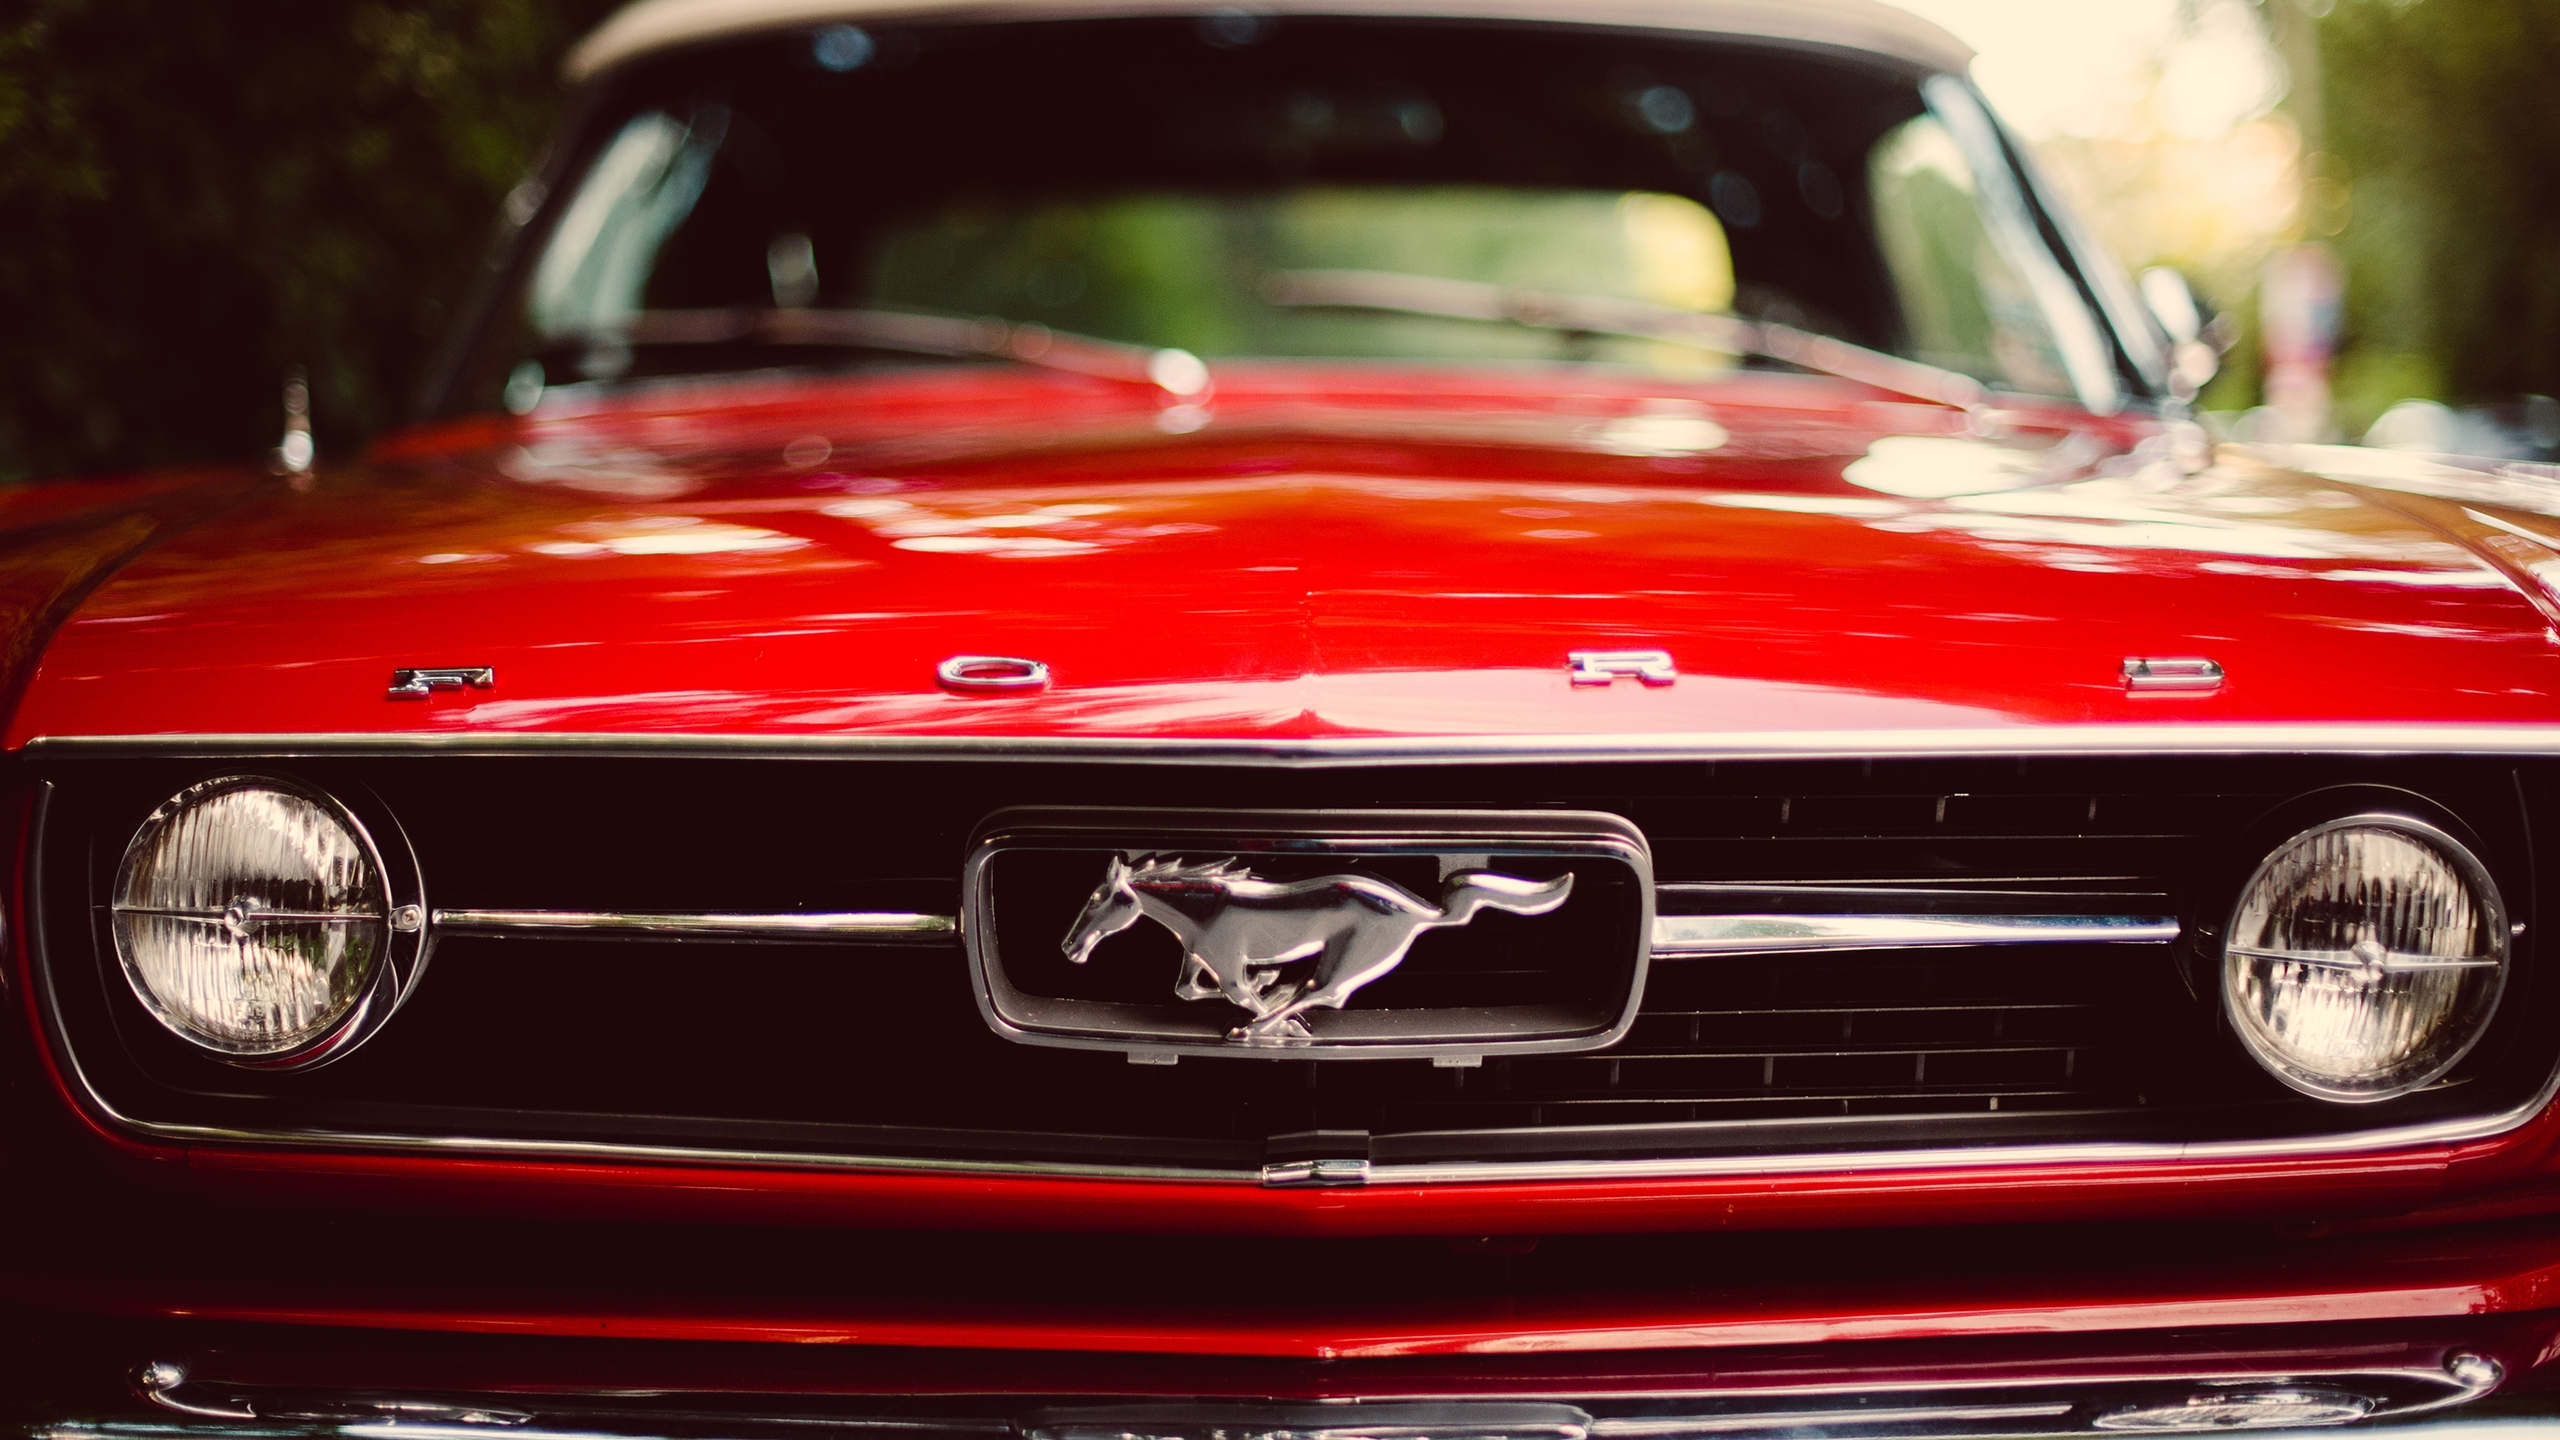 Red Ford Mustang  for 2560x1440 HDTV resolution